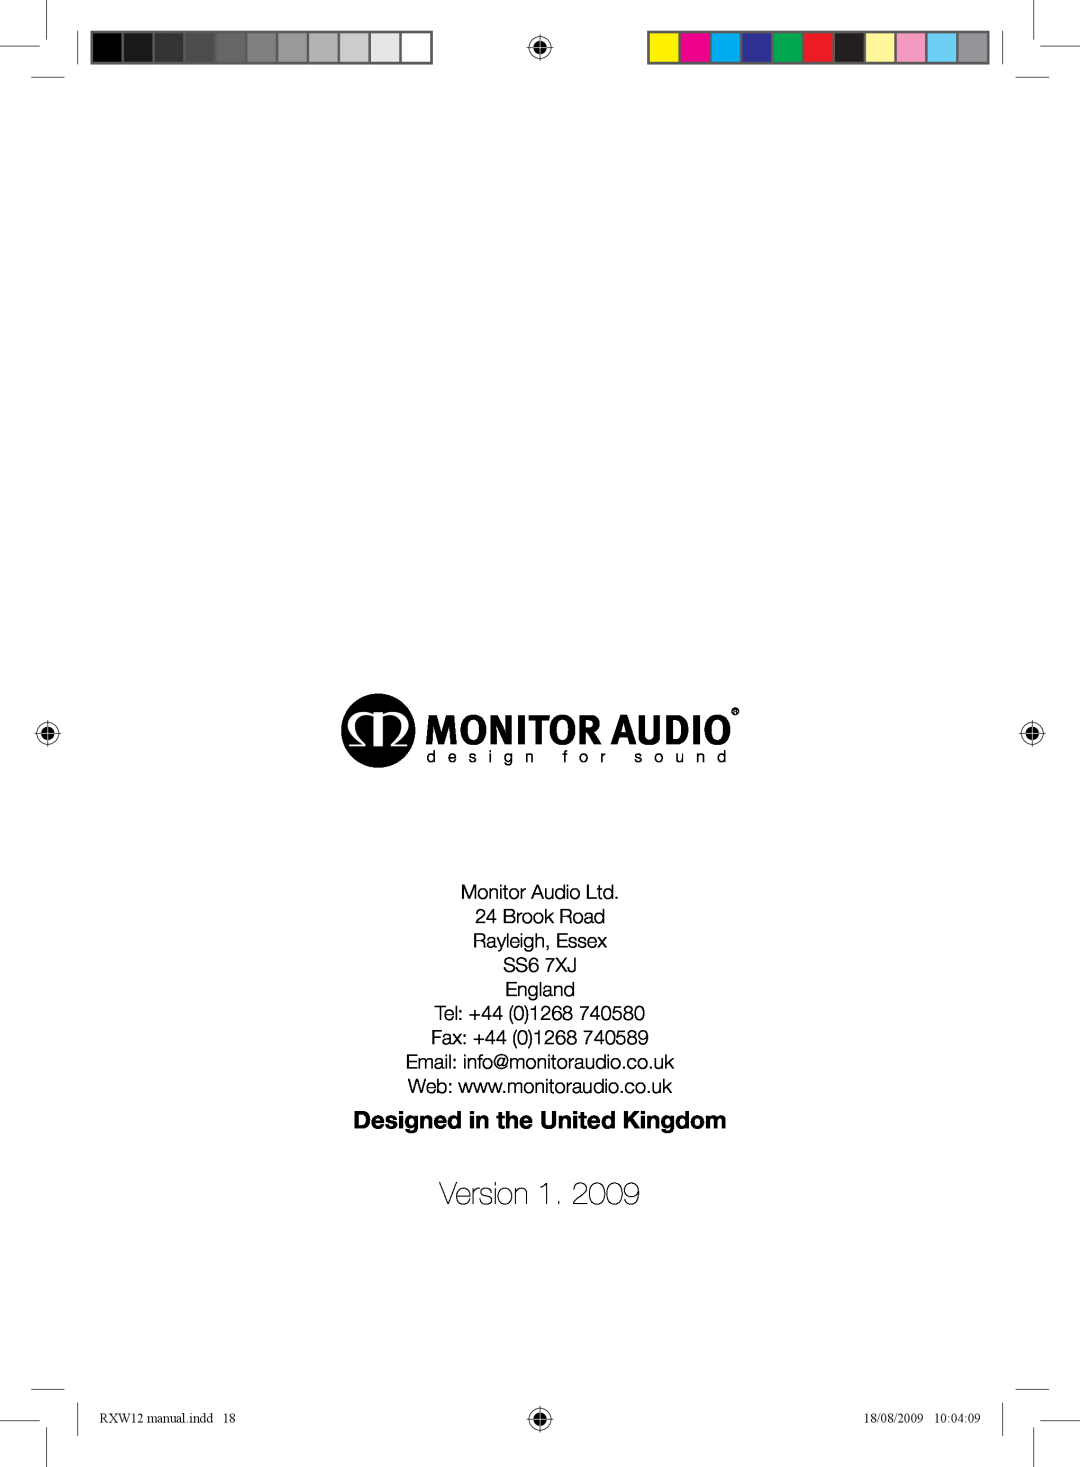 Monitor Audio RXW-12 owner manual Version, Designed in the United Kingdom, RXW12 manual.indd, 18/08/2009 10 